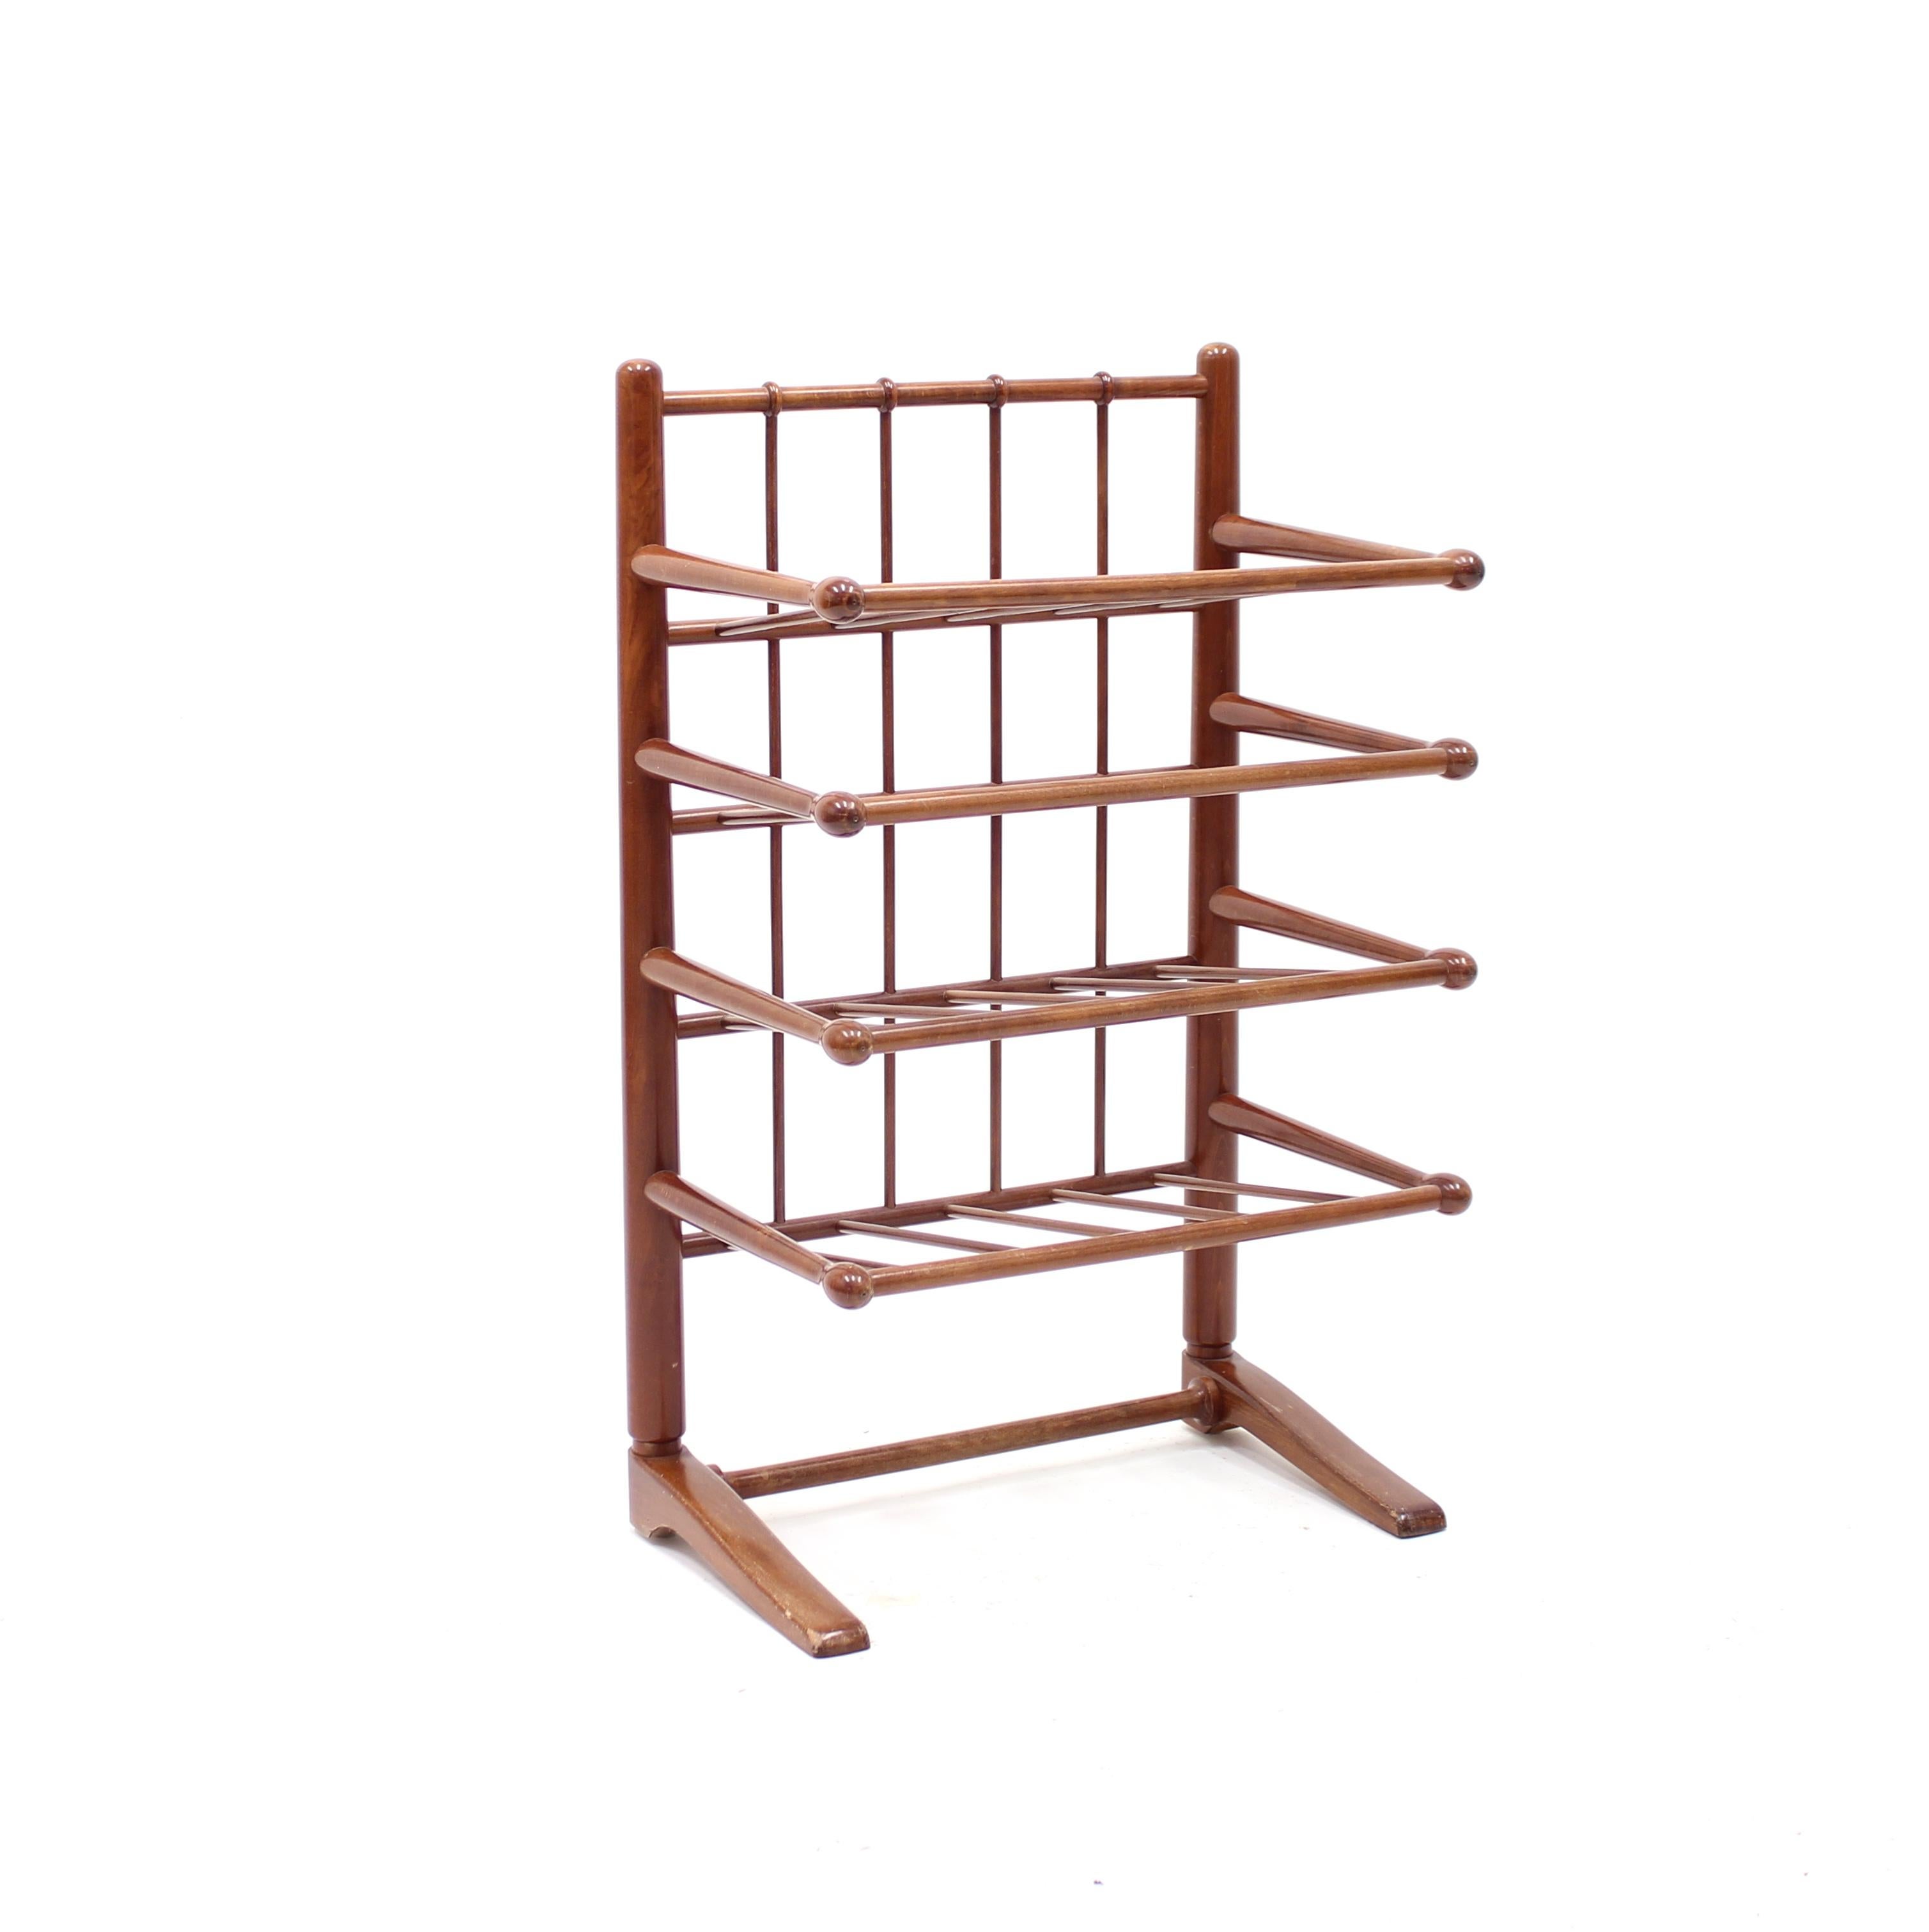 Scandinavian magazine or note rack in mahogany with four shelves, made in the 1950s. This model has for a long time been attributed to Josef Frank and equally often also to Danish designer Frits Henningsen. It may be some of them but proof of this